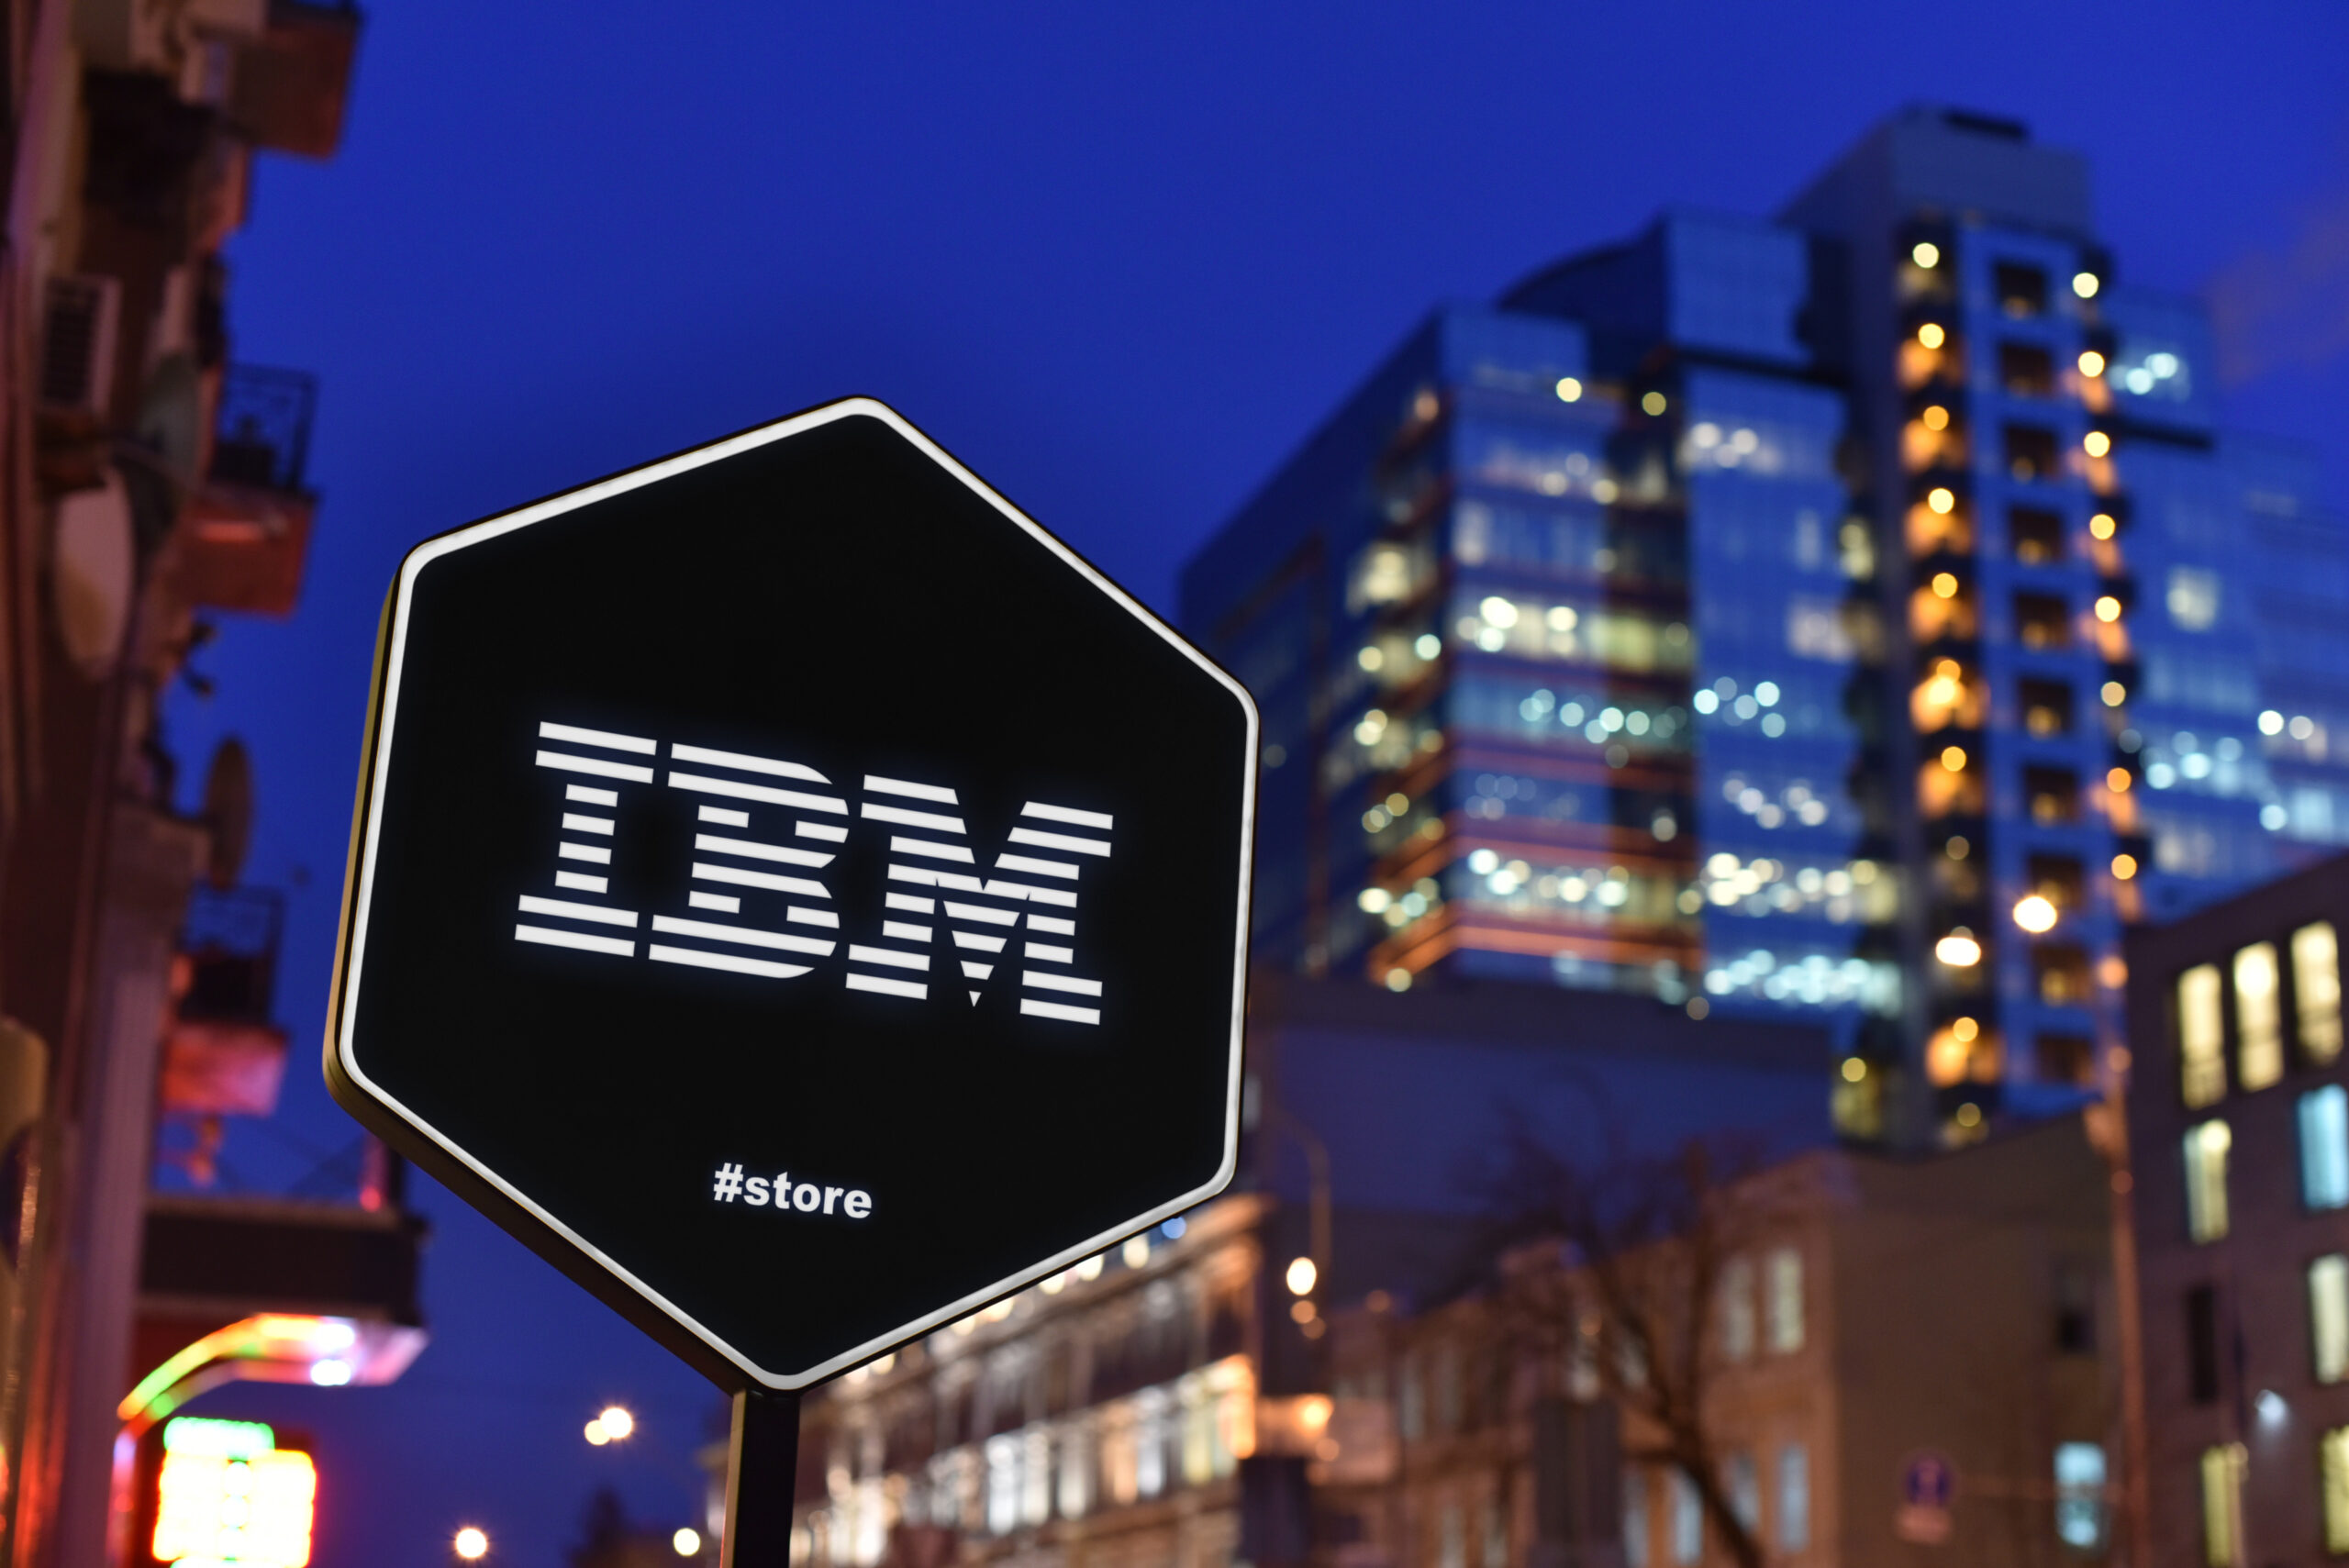 Layoffs in tech industry continues as IBM cuts 3,900 jobs